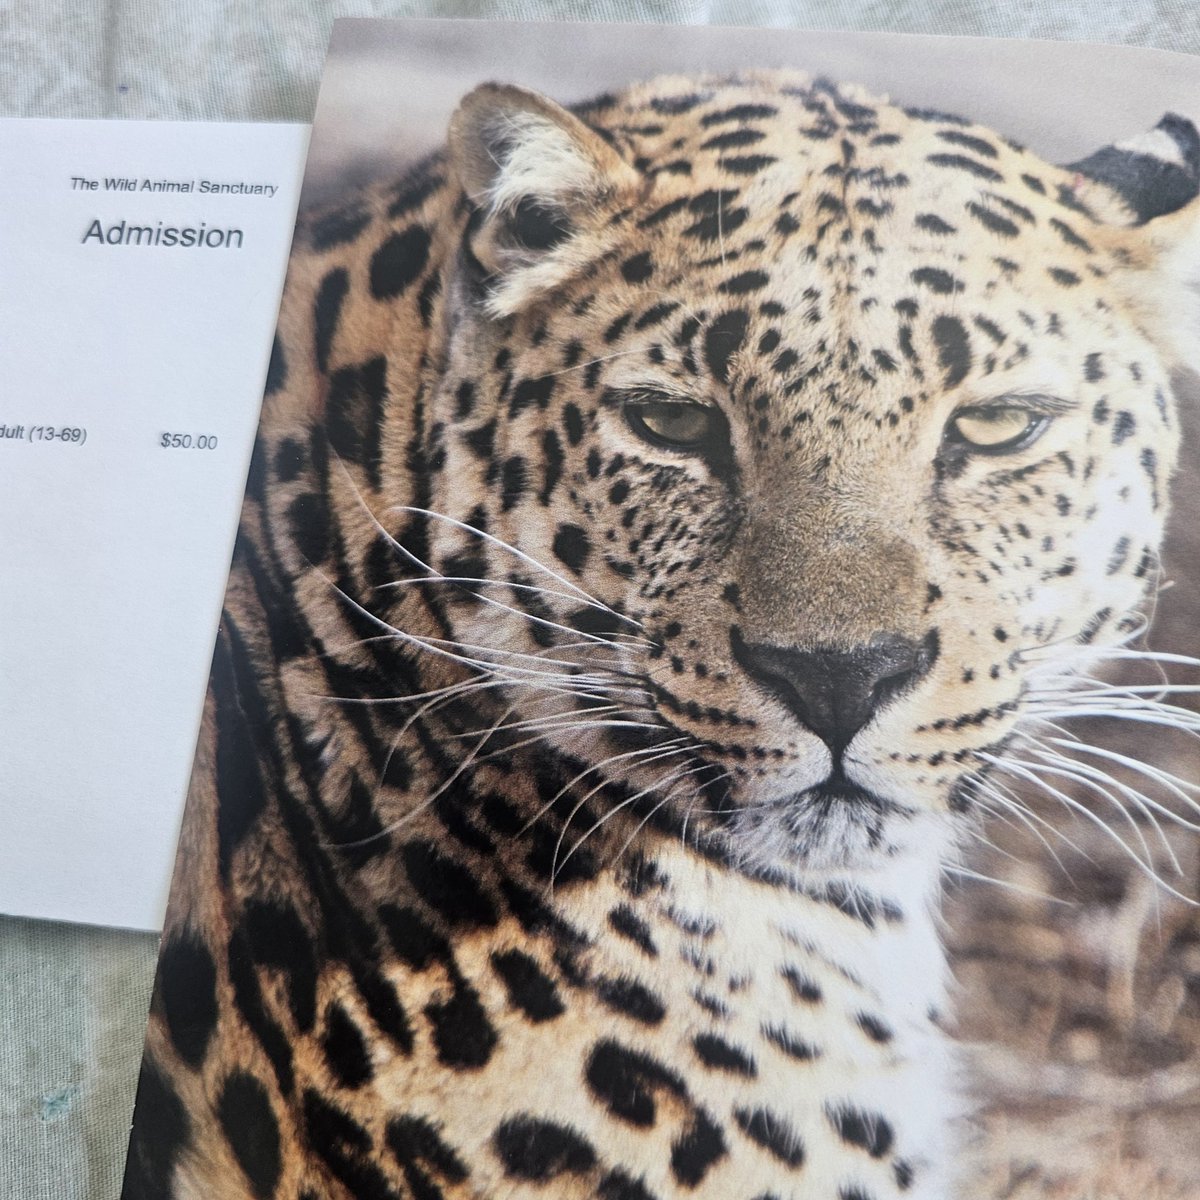 My friend Phyl (who I've known since I was a little girl) sent me such an amazing and wonderful gift that I'm in total awe! 

I've been wanting to visit @wildanimalsanctuary, and I get to make my dream come true this year!